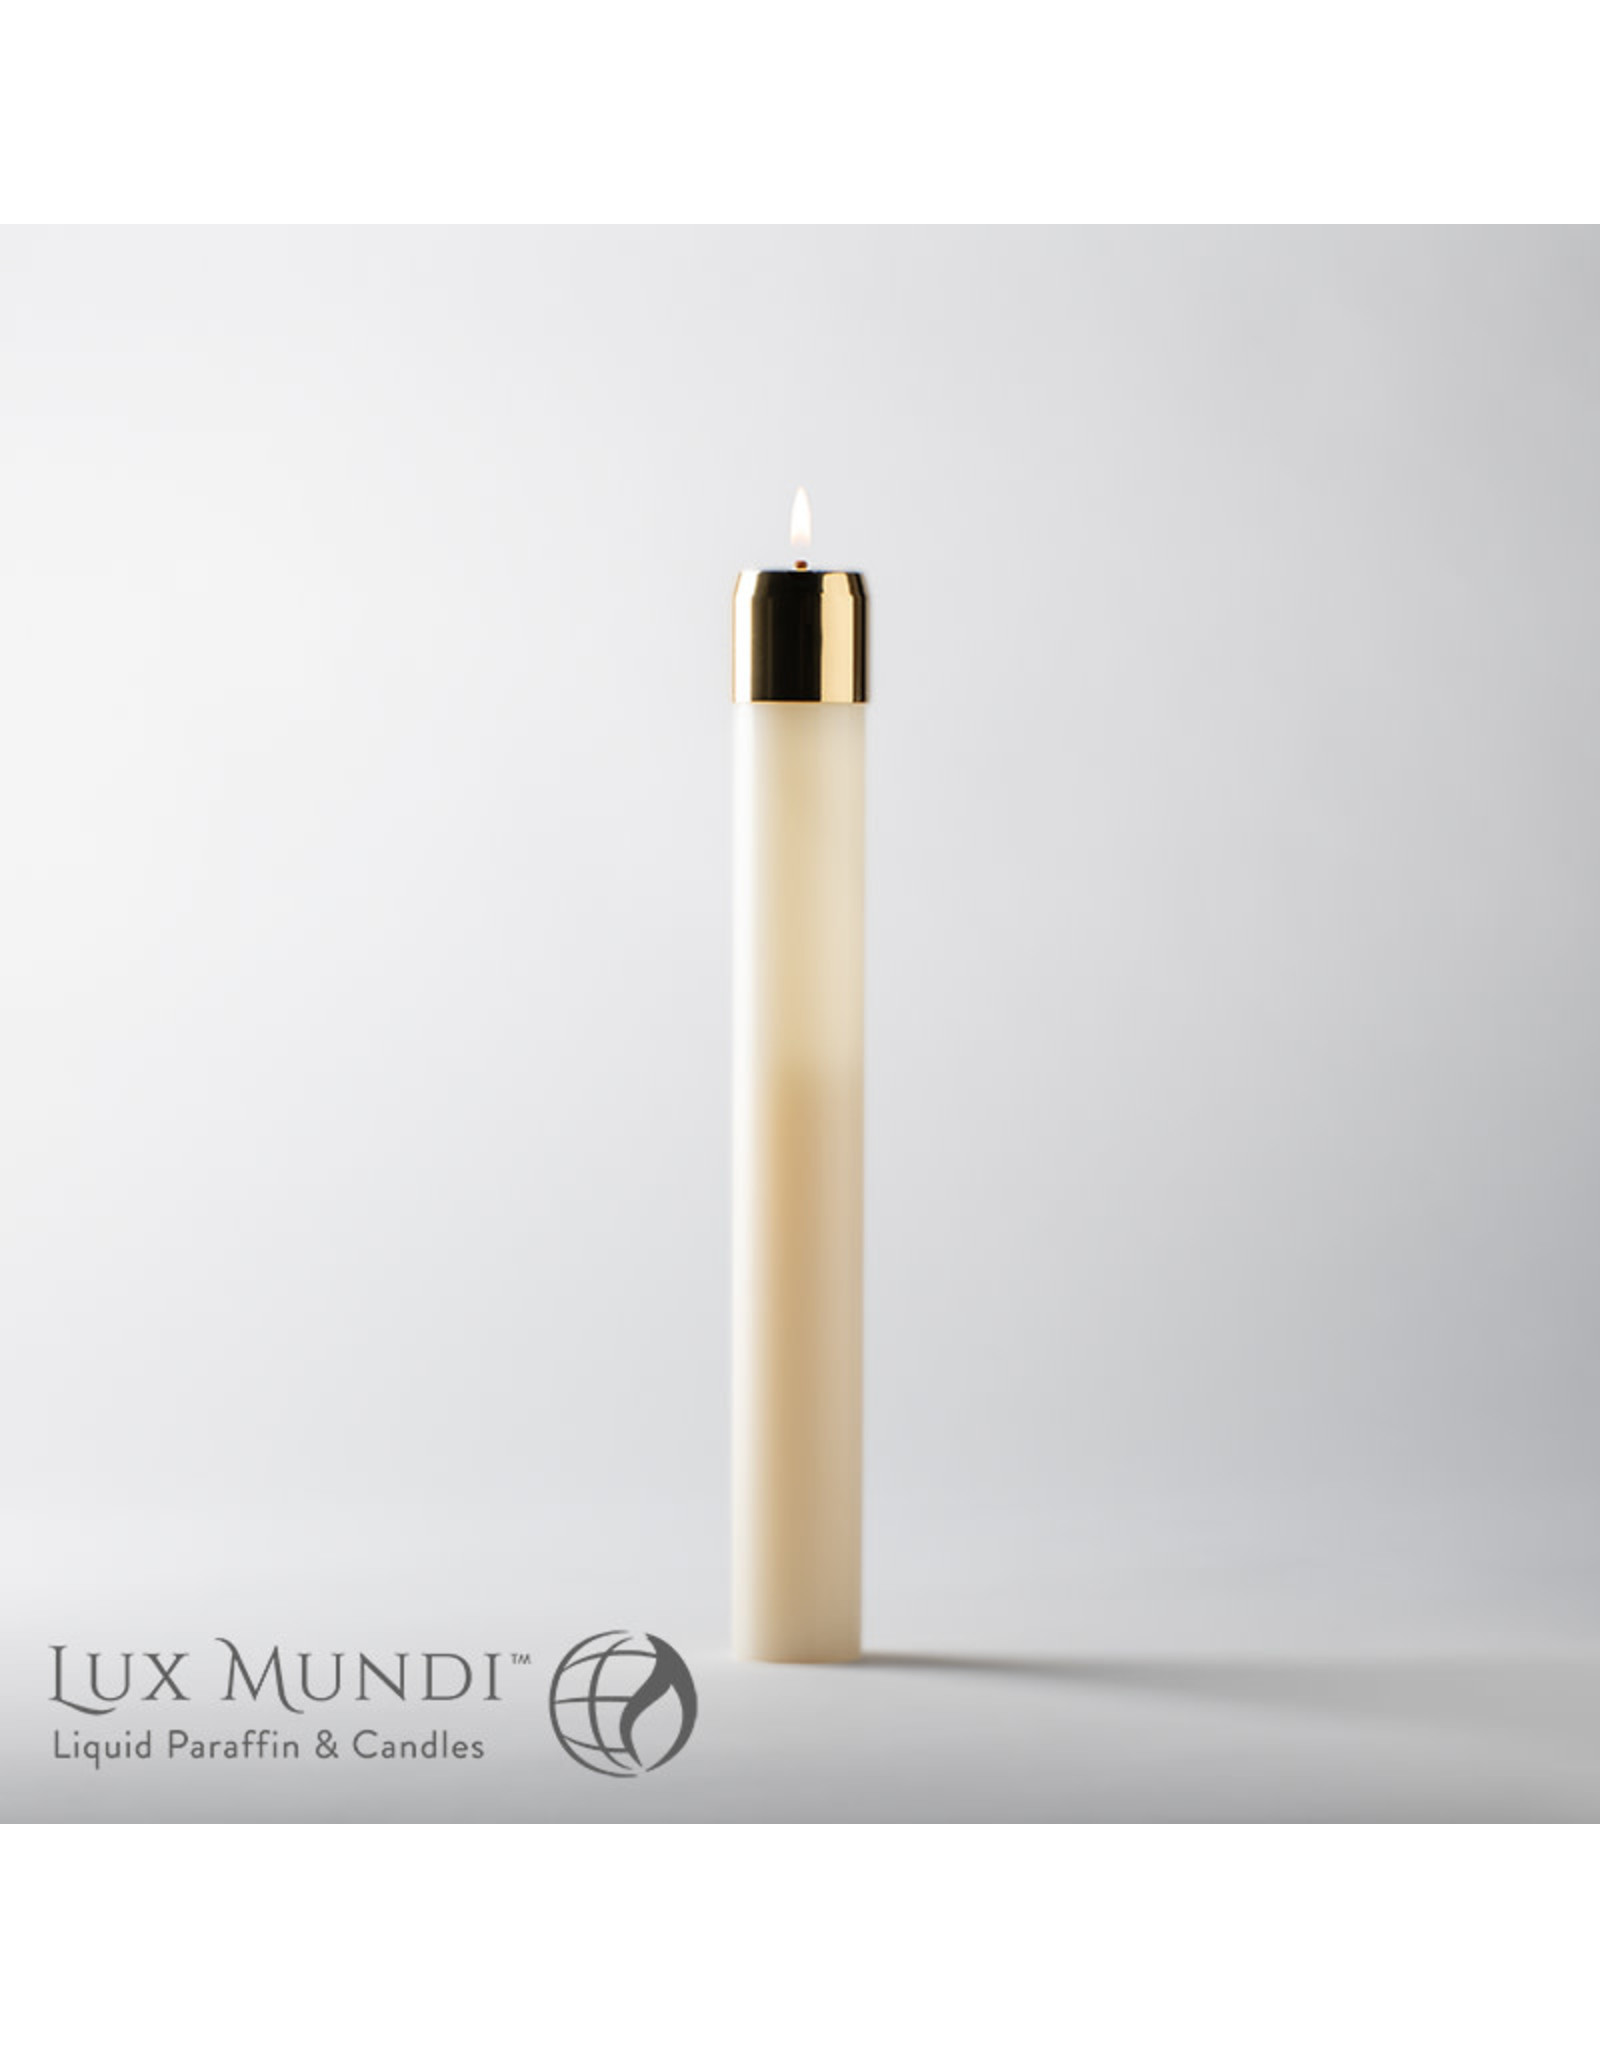 Lux Mundi Refillable Oil Altar Candle 7/8"x12"